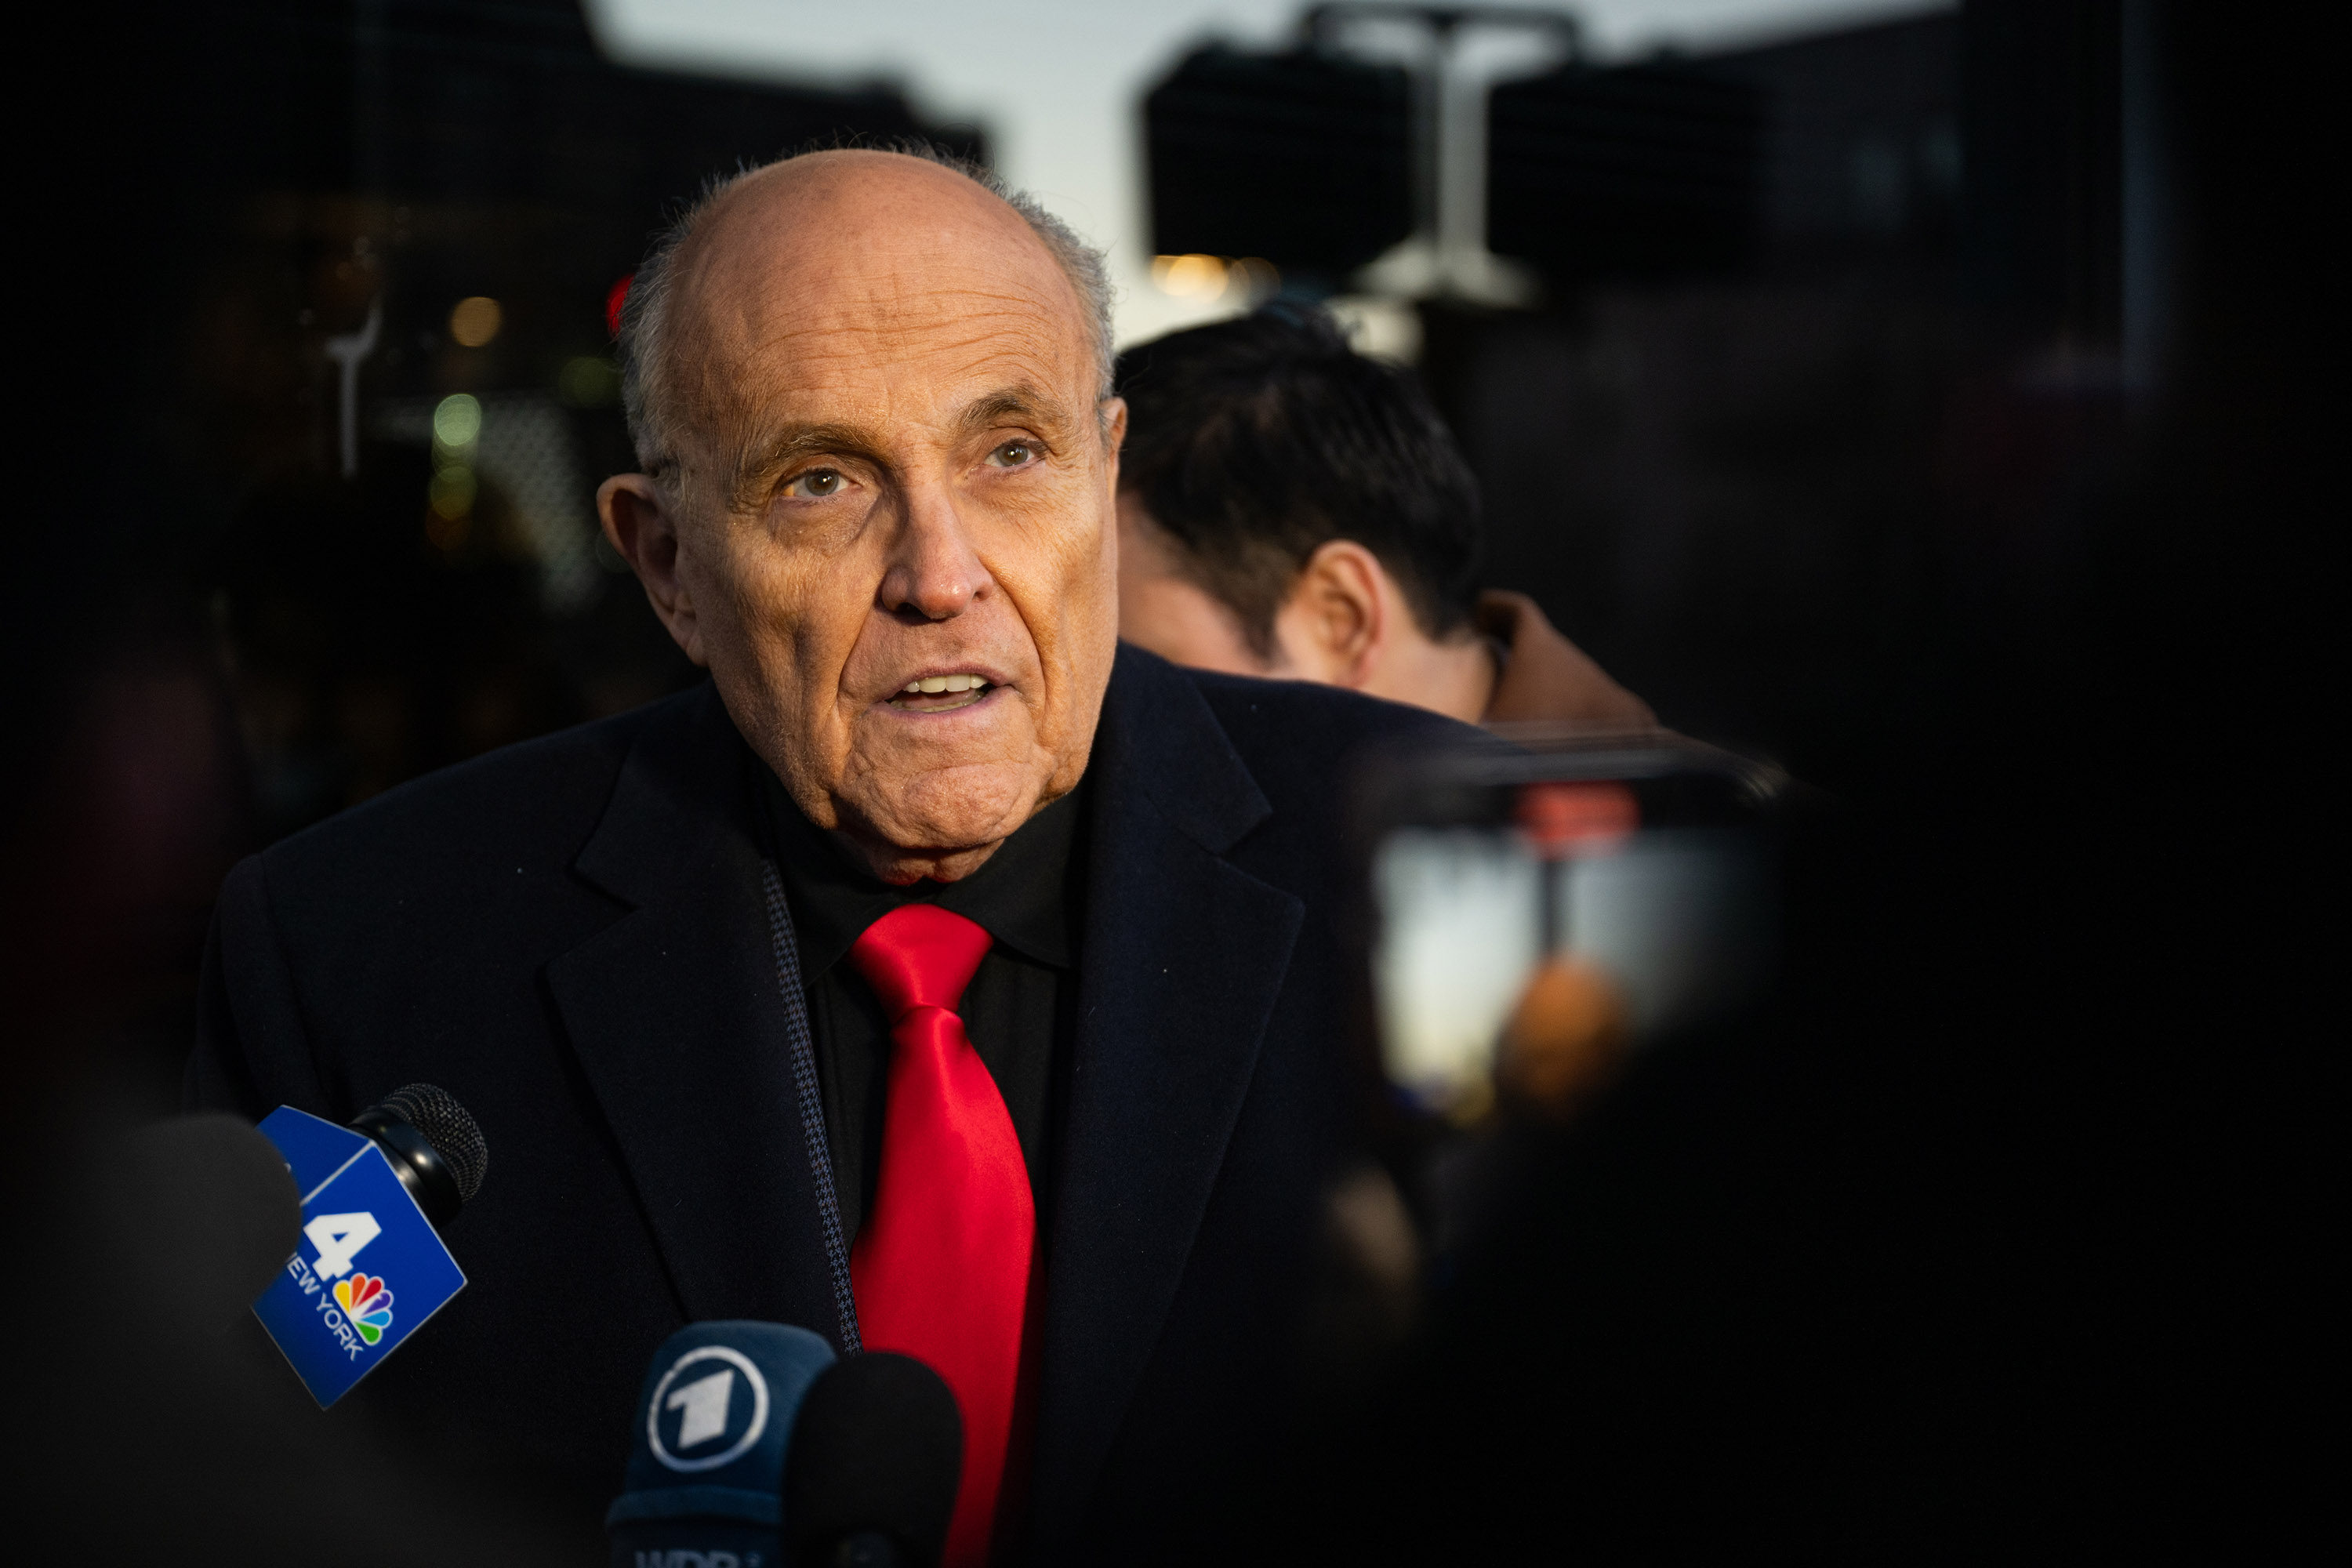 Rudy Giuliani can no longer practice law in New York. Photo: Getty Images / TNS